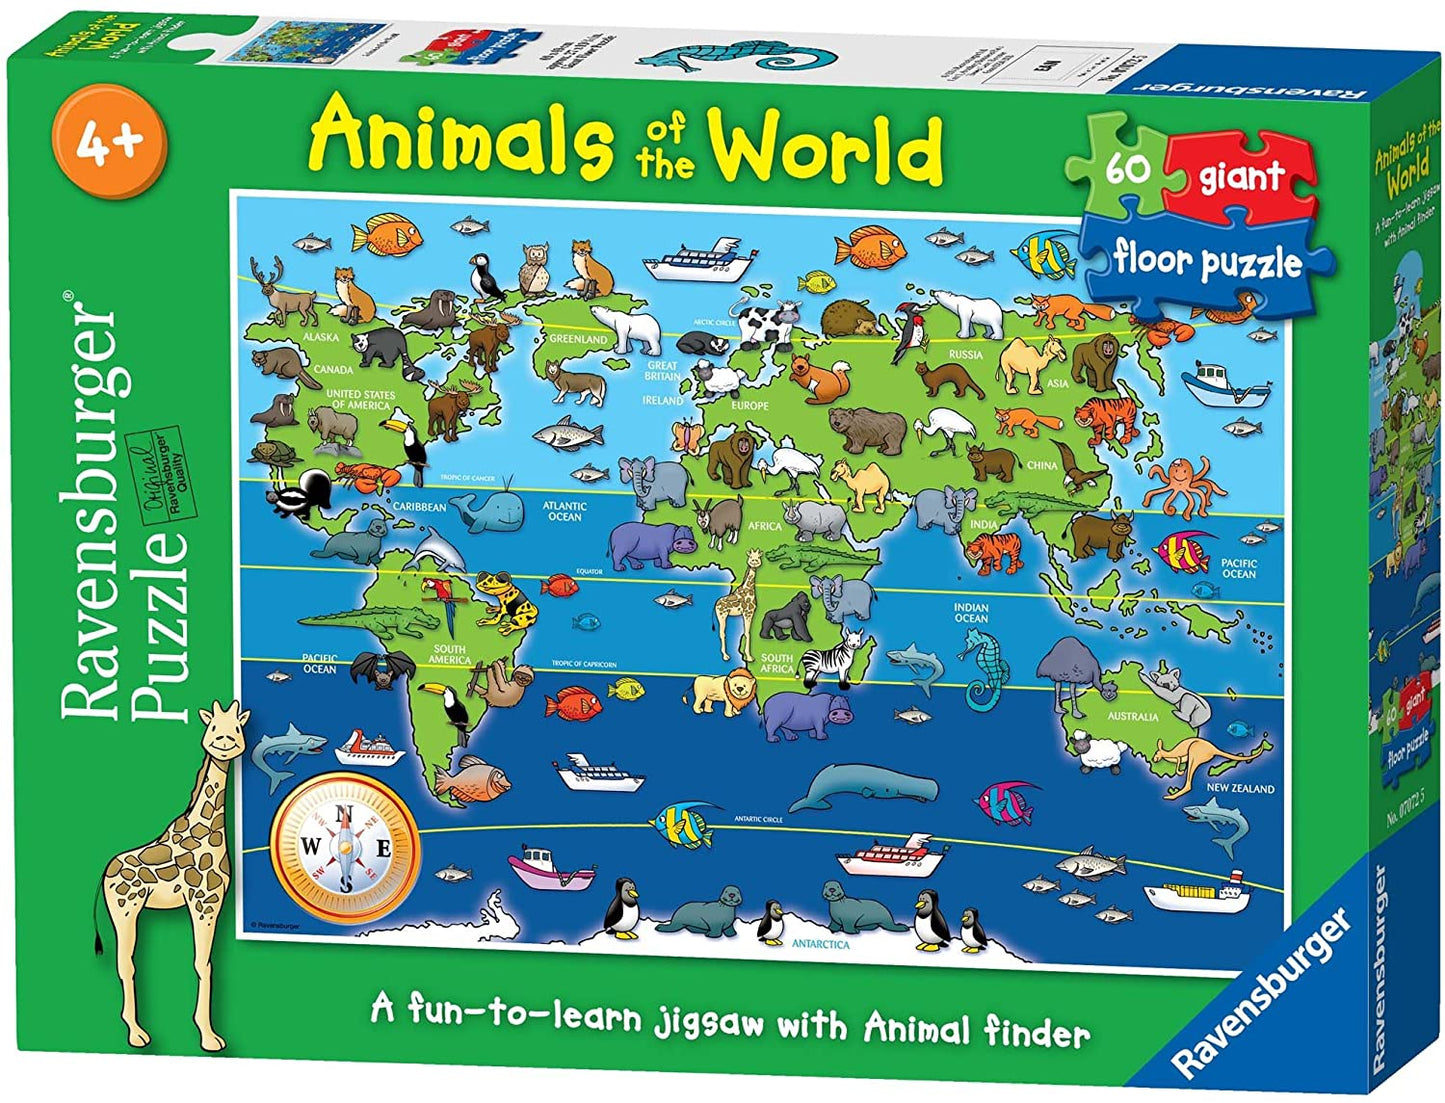 Ravensburger - Animals of the World Giant Floor Puzzle - 60 Piece Jigsaw Puzzle